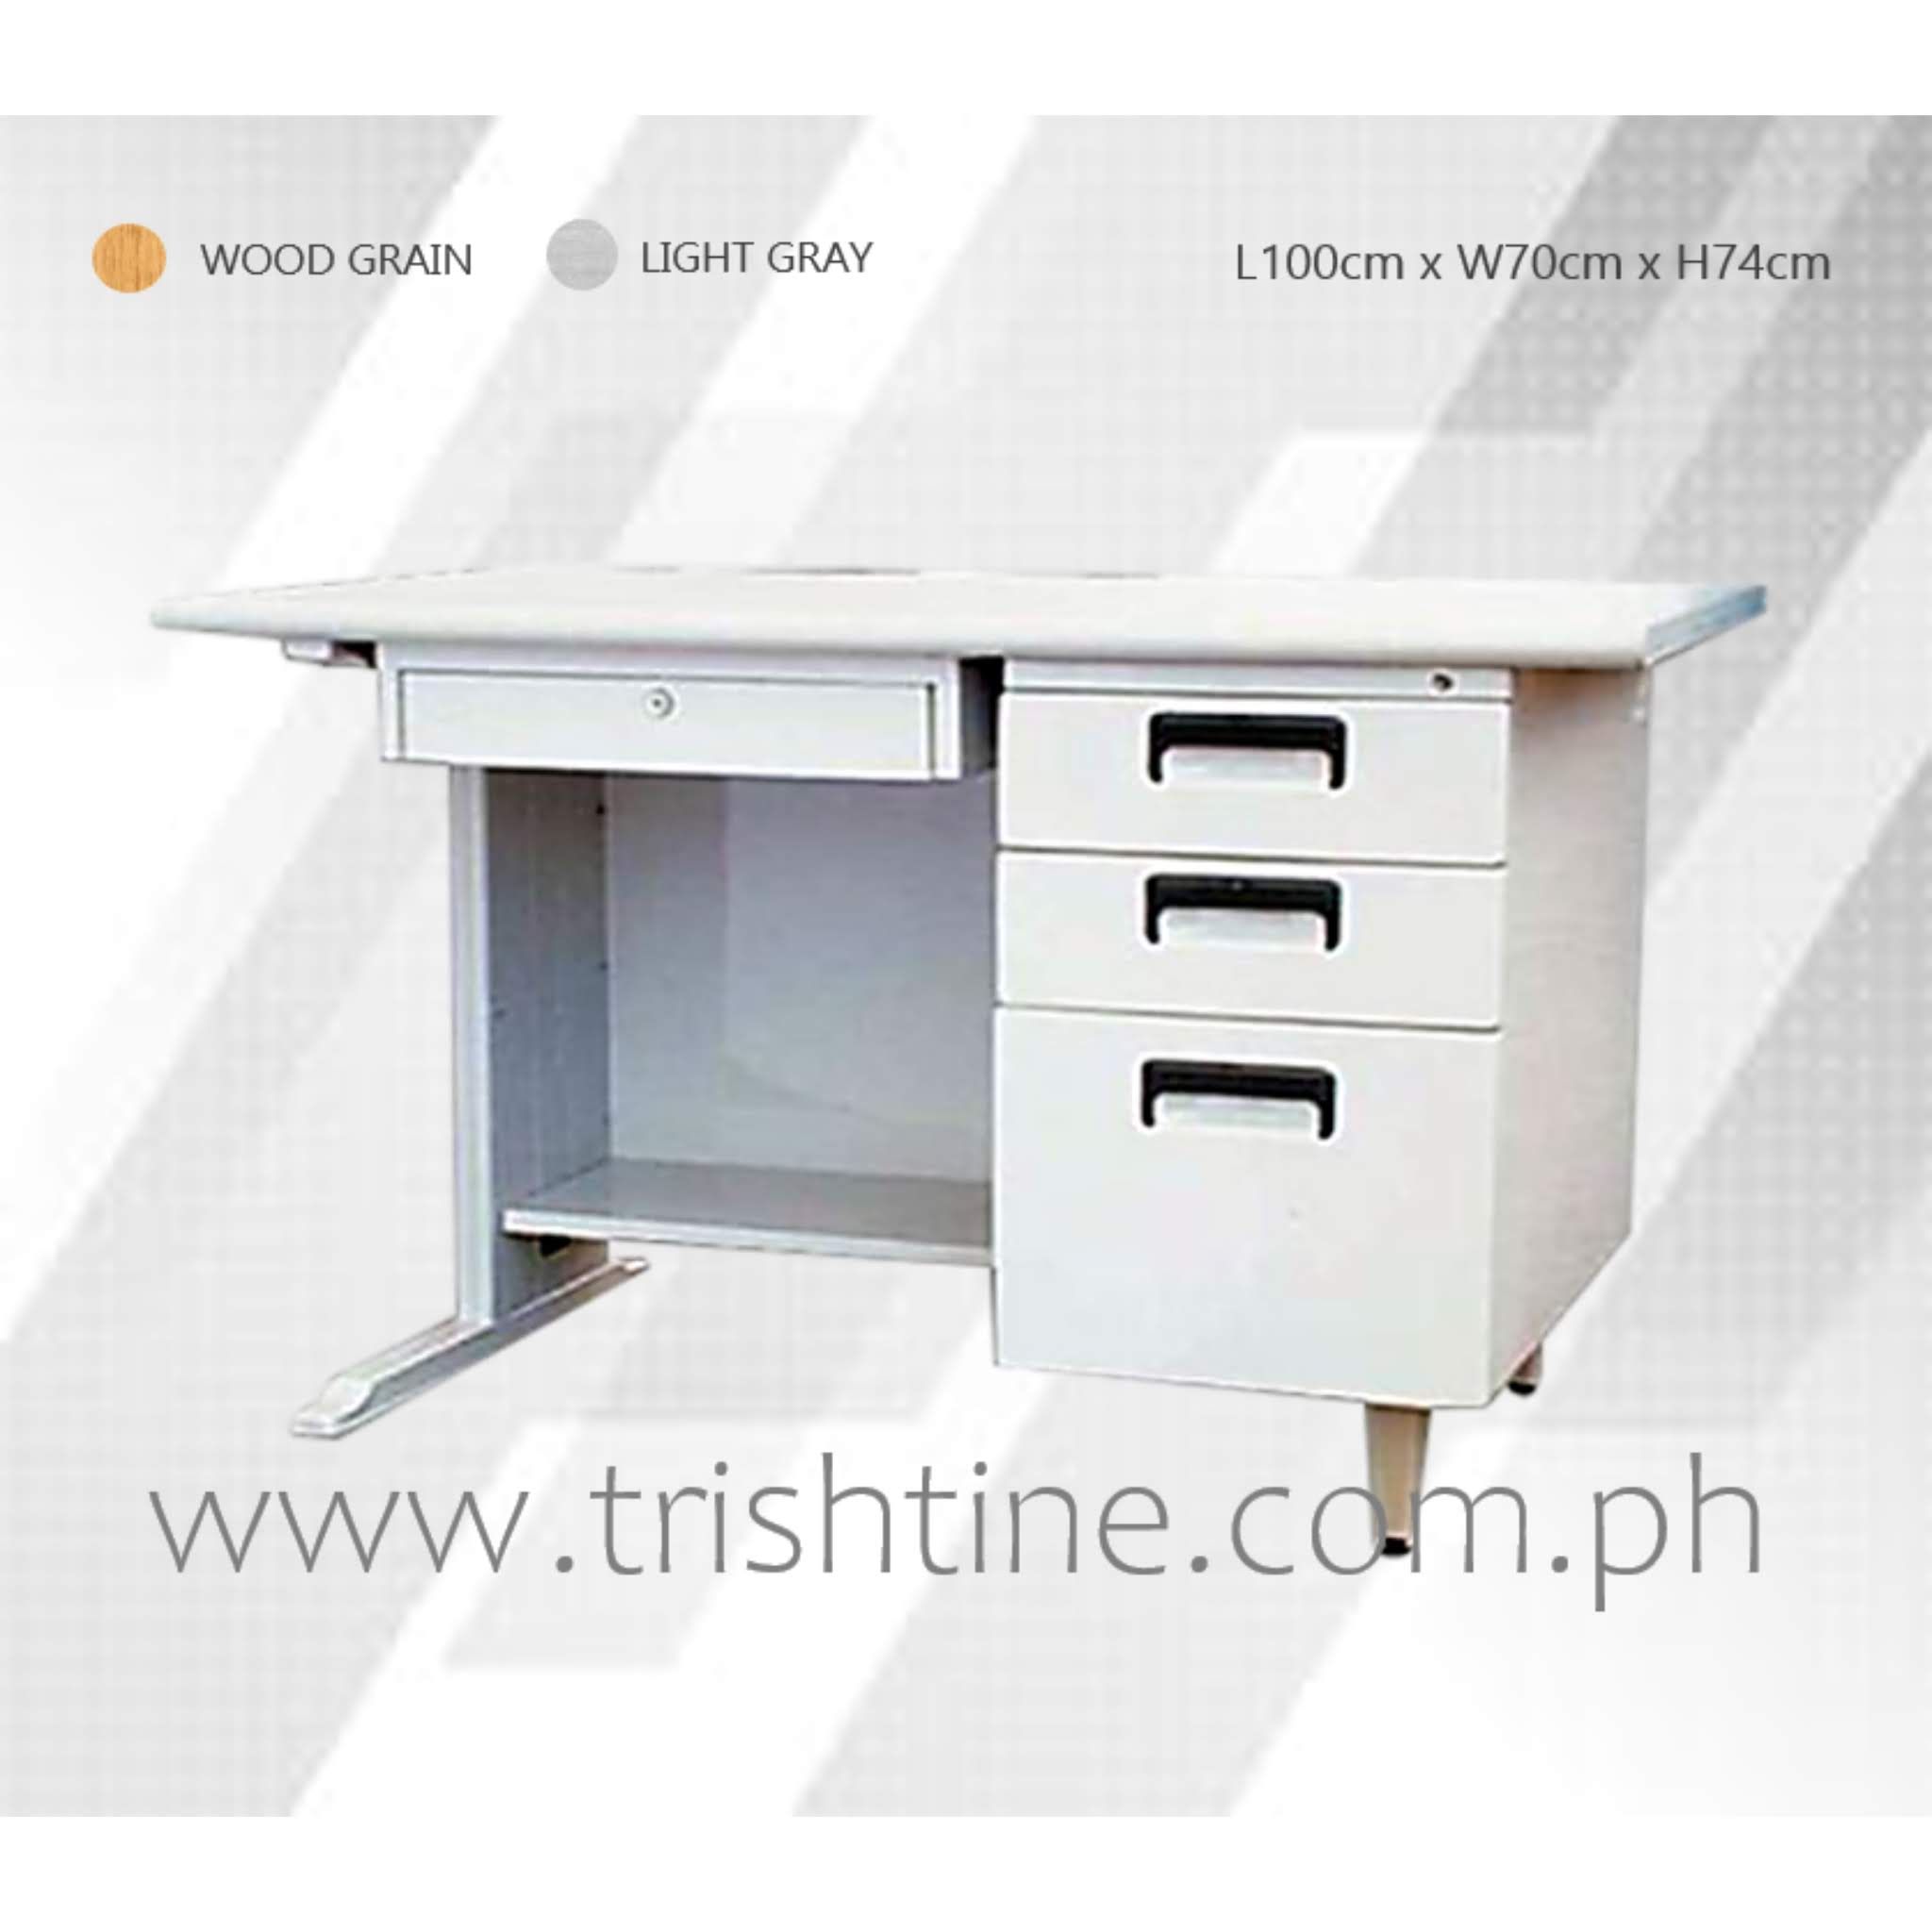 Toff 031 Freestanding Office Table With Drawers | Trishtine For Freestanding Tables With Drawers (View 8 of 15)